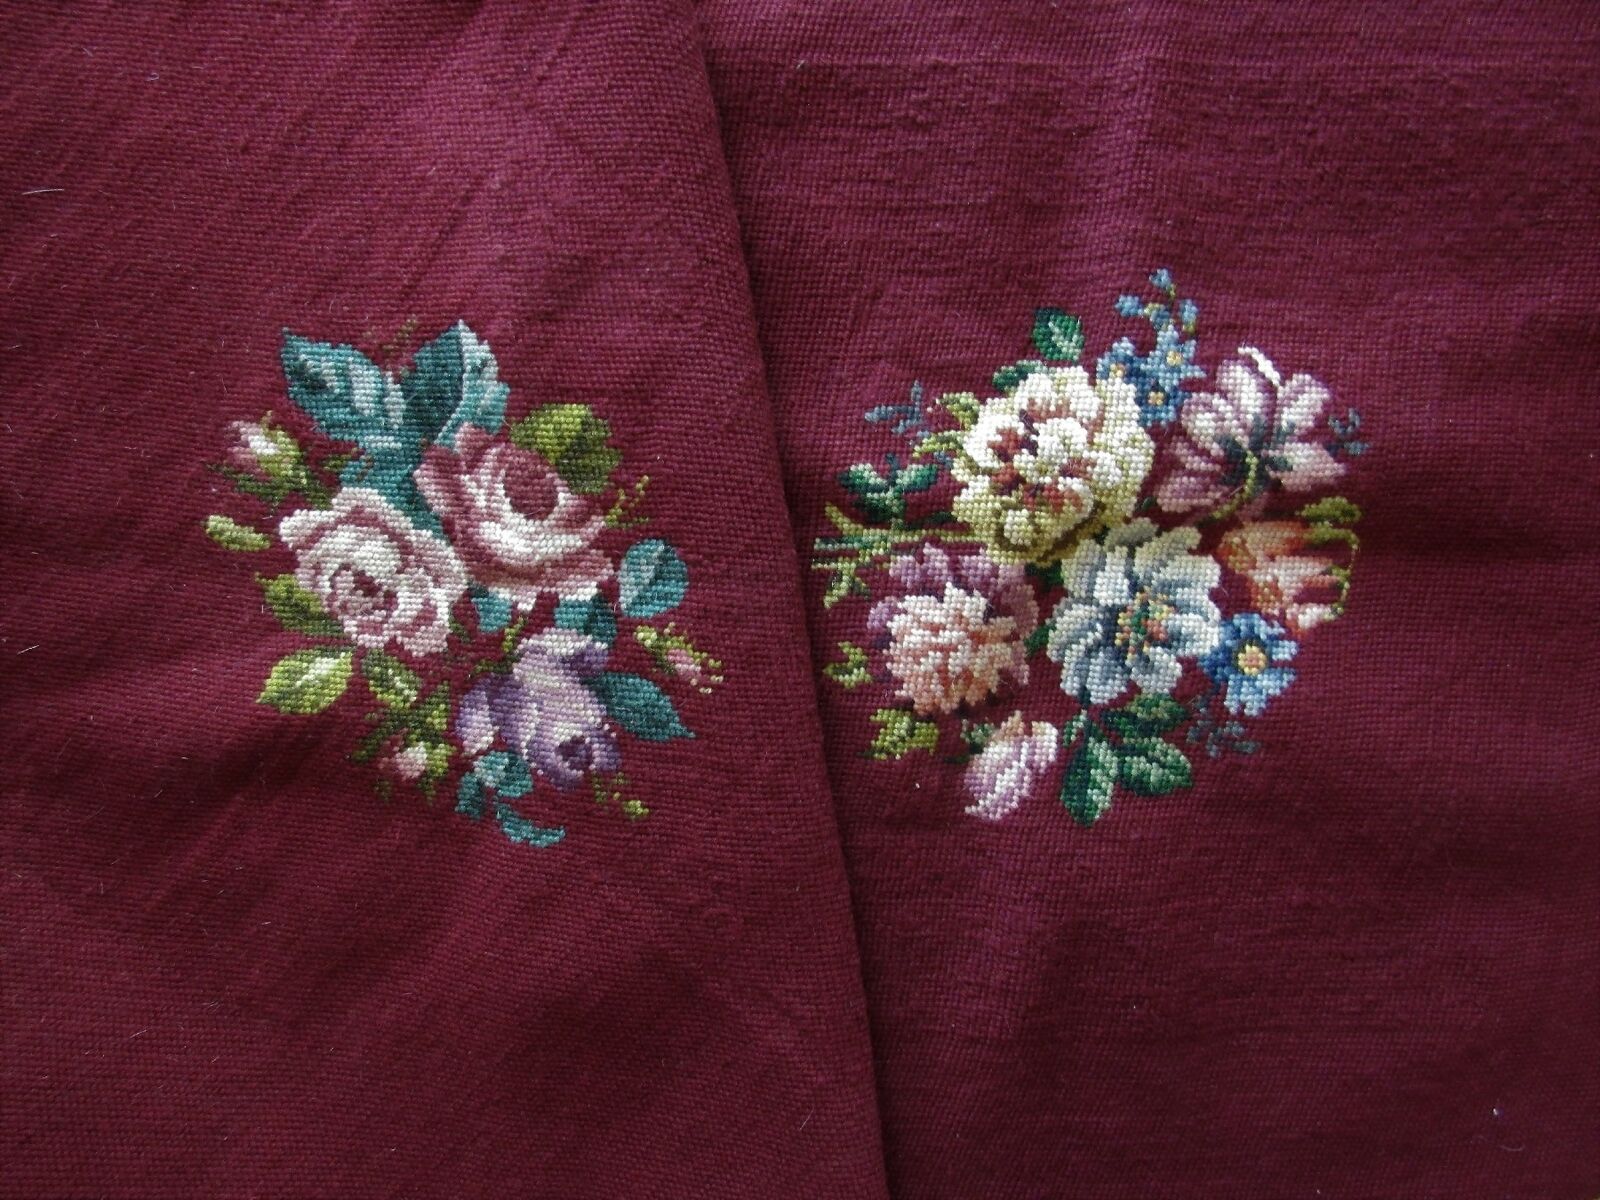 TWO Large 21x21 Needlepoint Chair Seat Covers Rose Floral on Burgundy Handmade